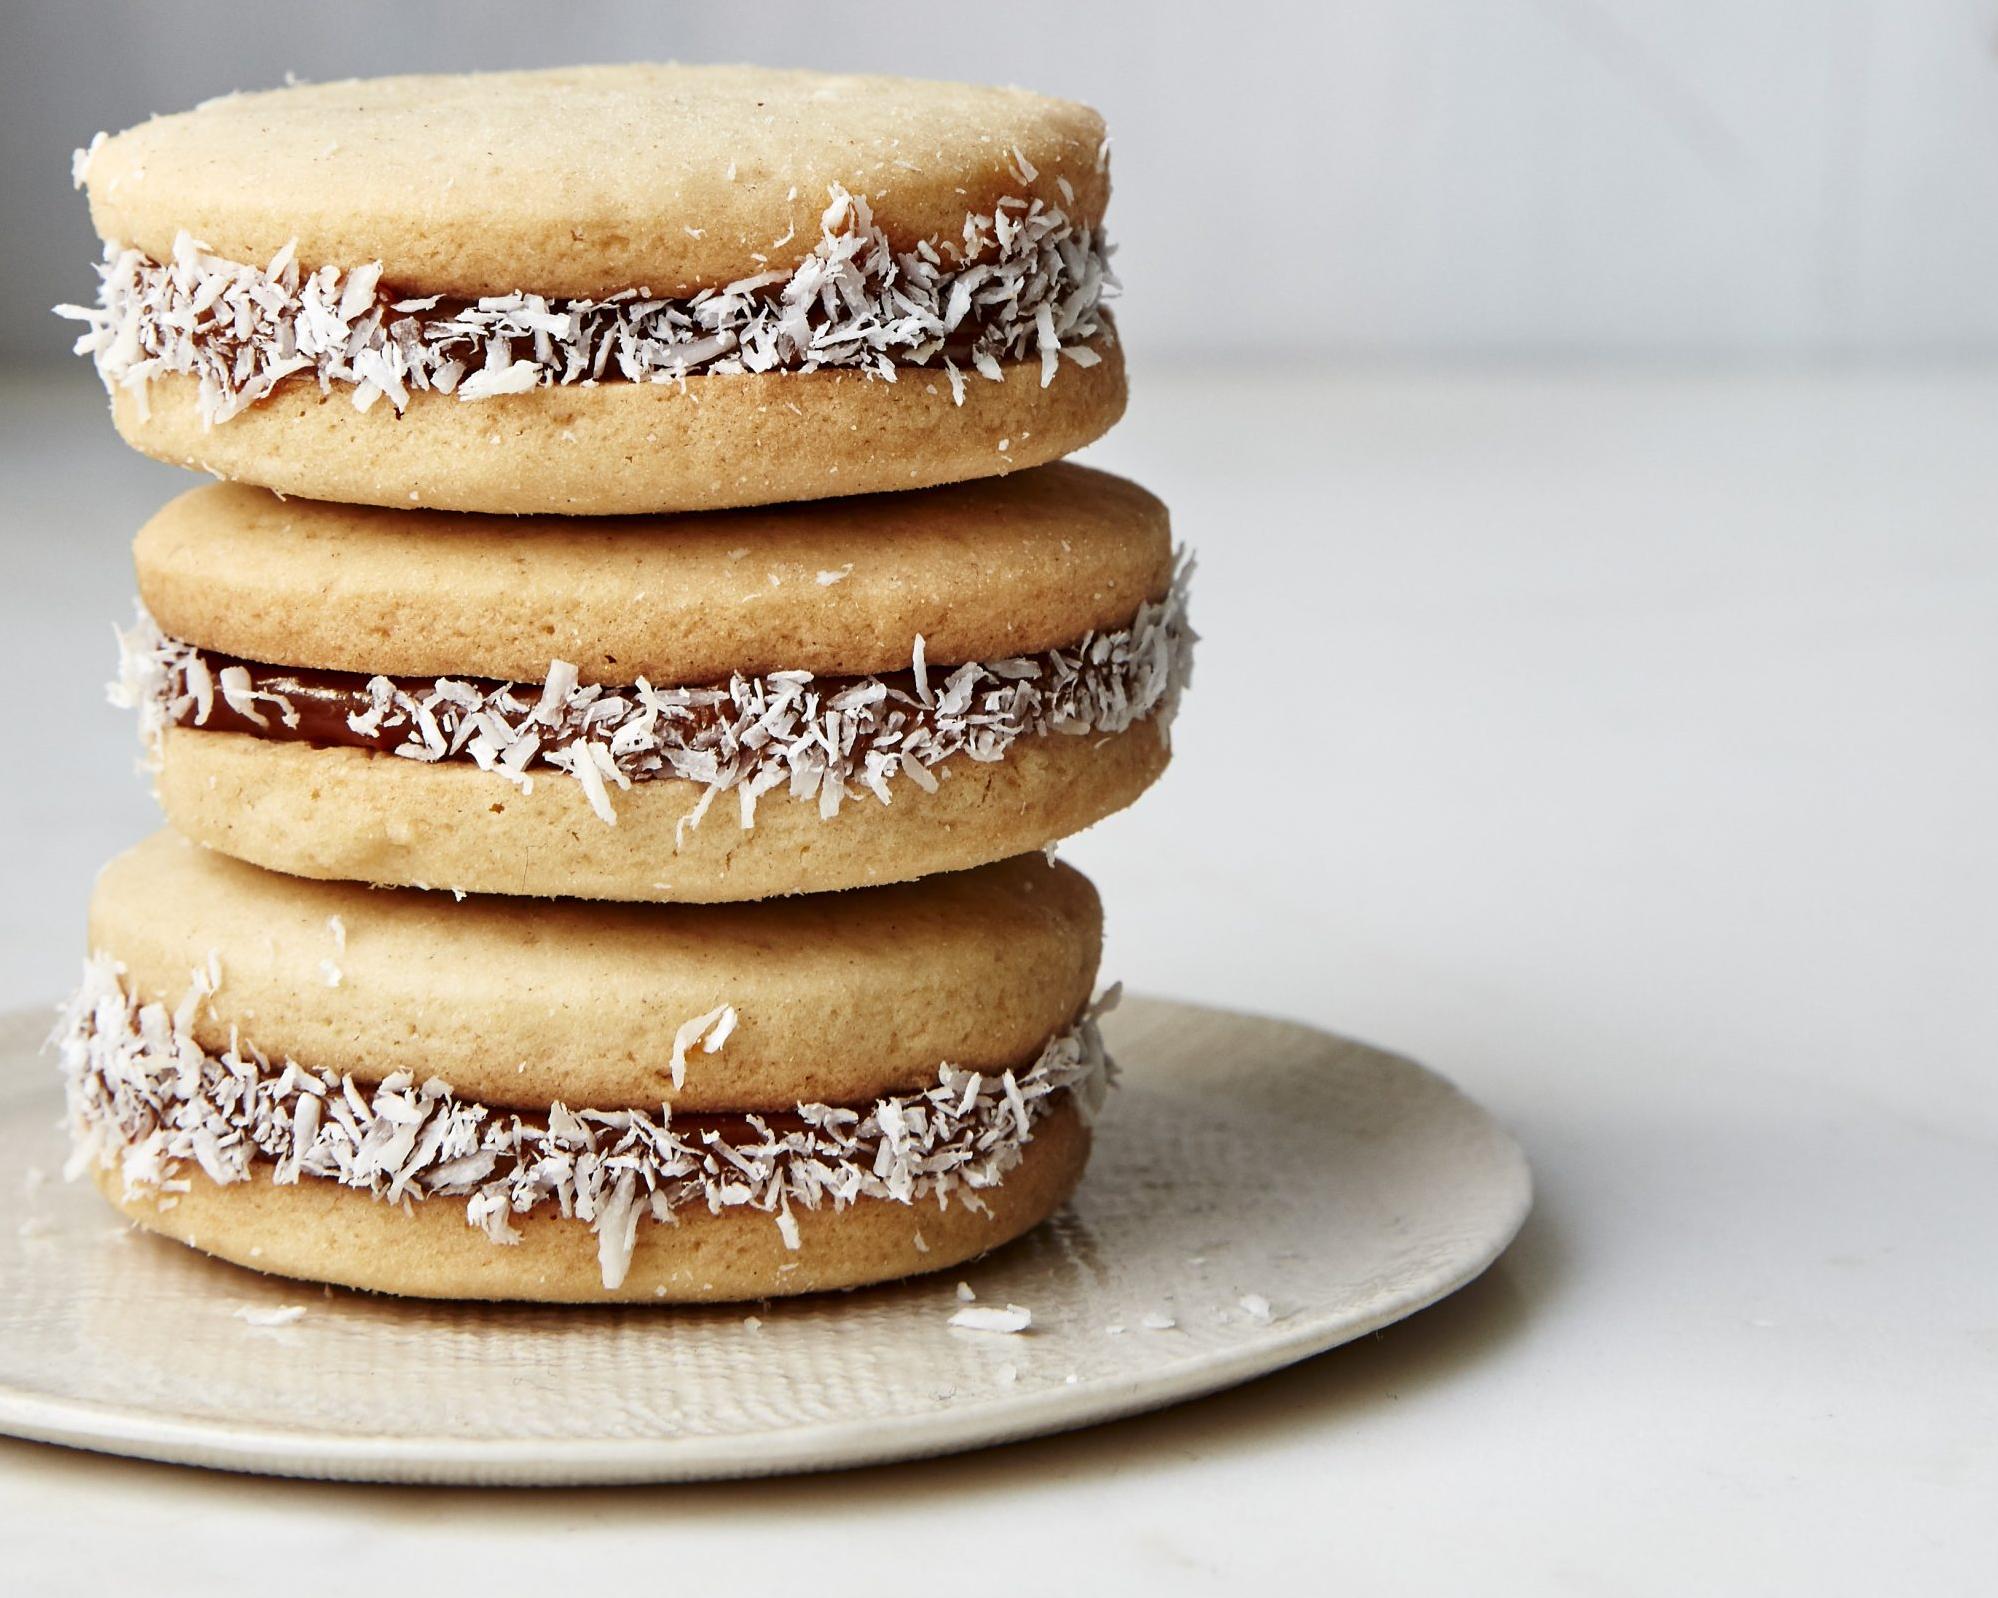  Don't be afraid to indulge in these rich and buttery treats.